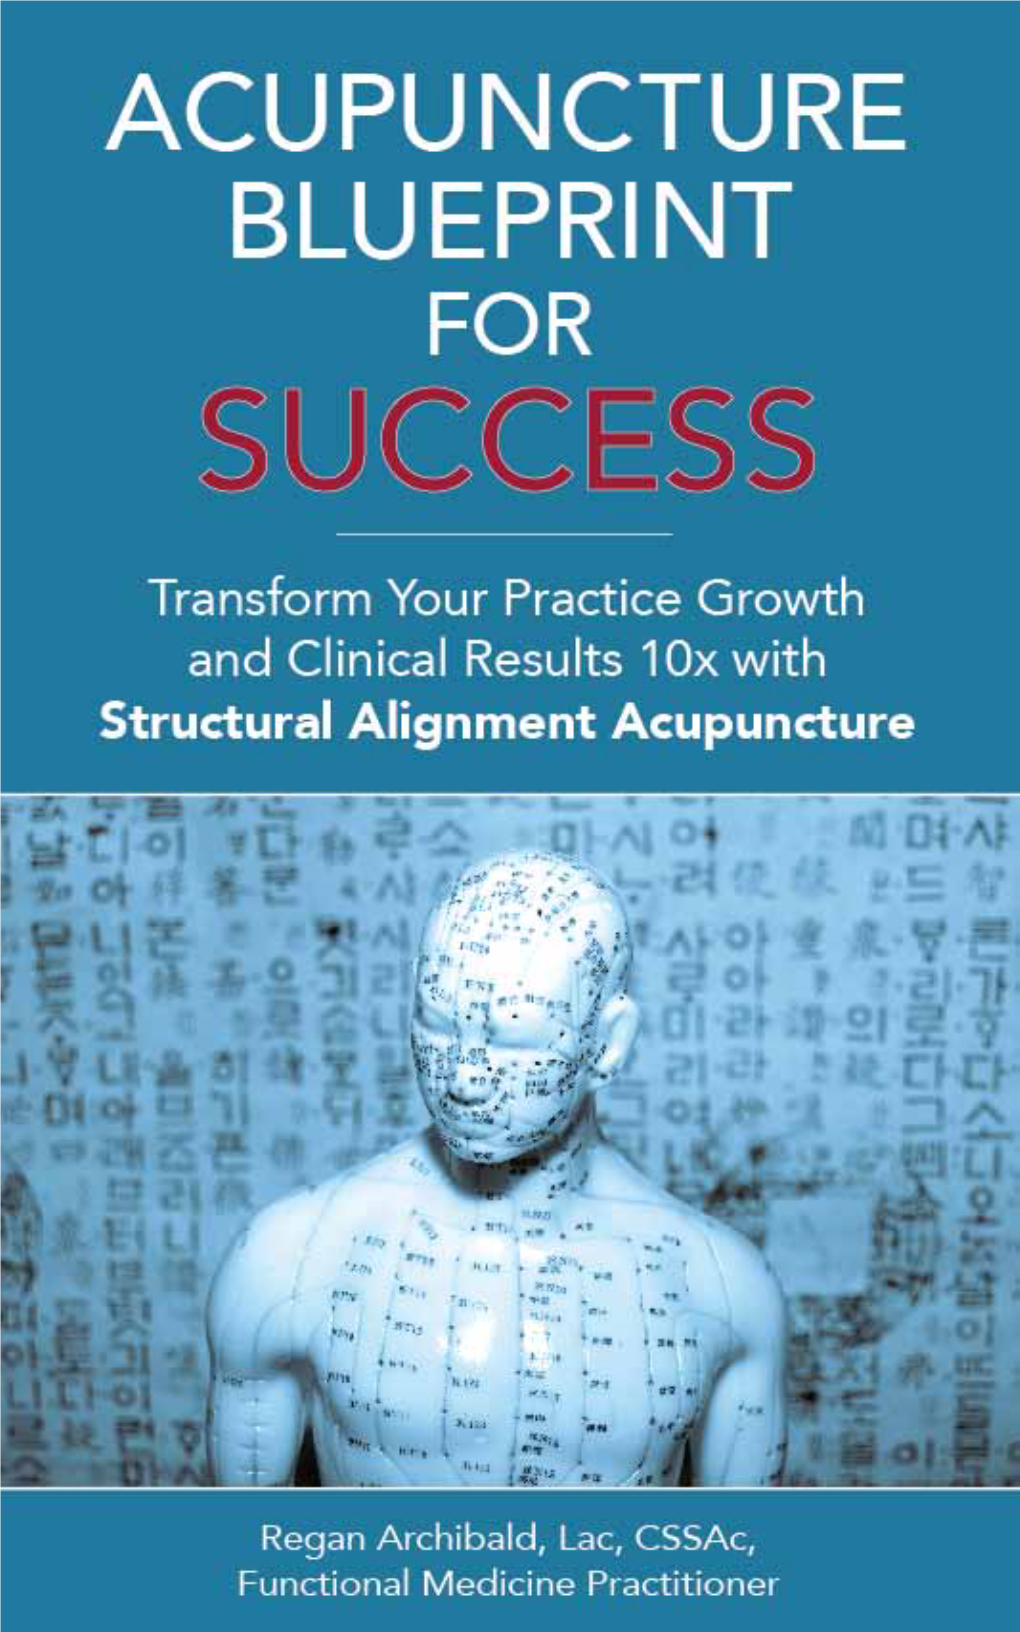 Acupuncture Blueprint for Success Transform Your Practice Growth 10X and Clinical Results 10X with Structural Alignment Acupuncture